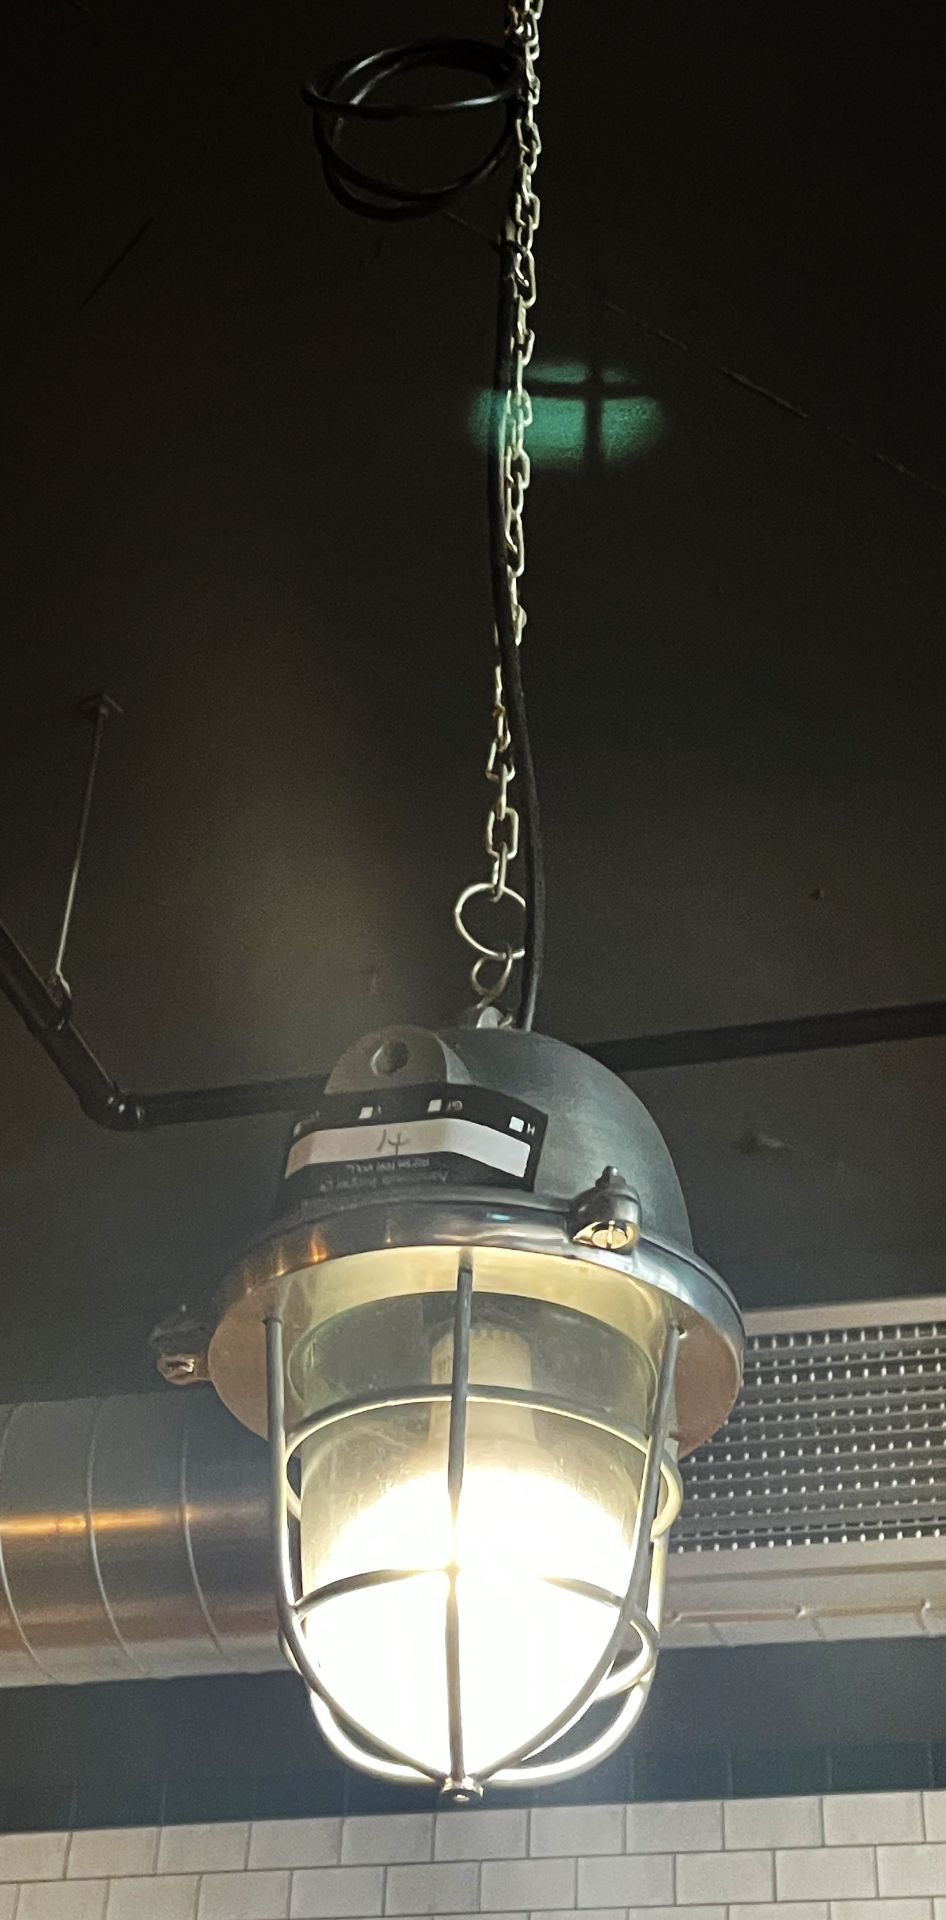 6 x Industrial Style Bulkhead Ceiling Light Pendants - Size: 30 x 120 cms - Suspended Size Unknown - Image 4 of 5